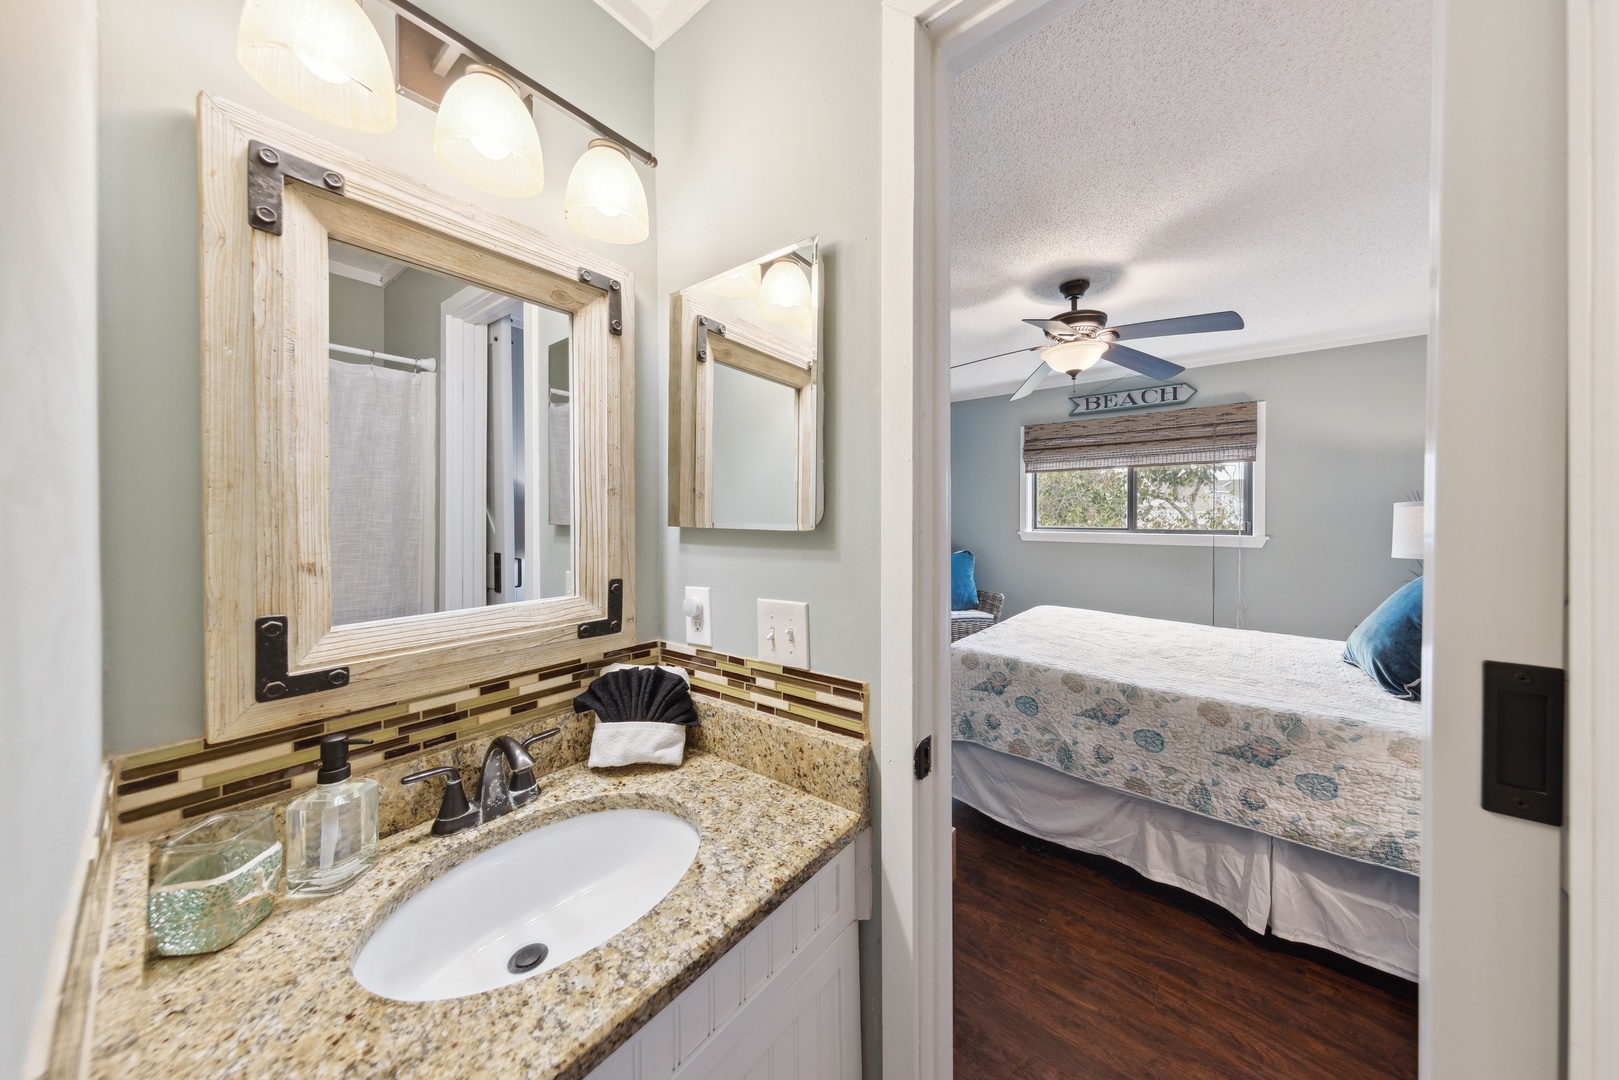 The queen ensuite bathroom includes a single vanity & shower/tub combo